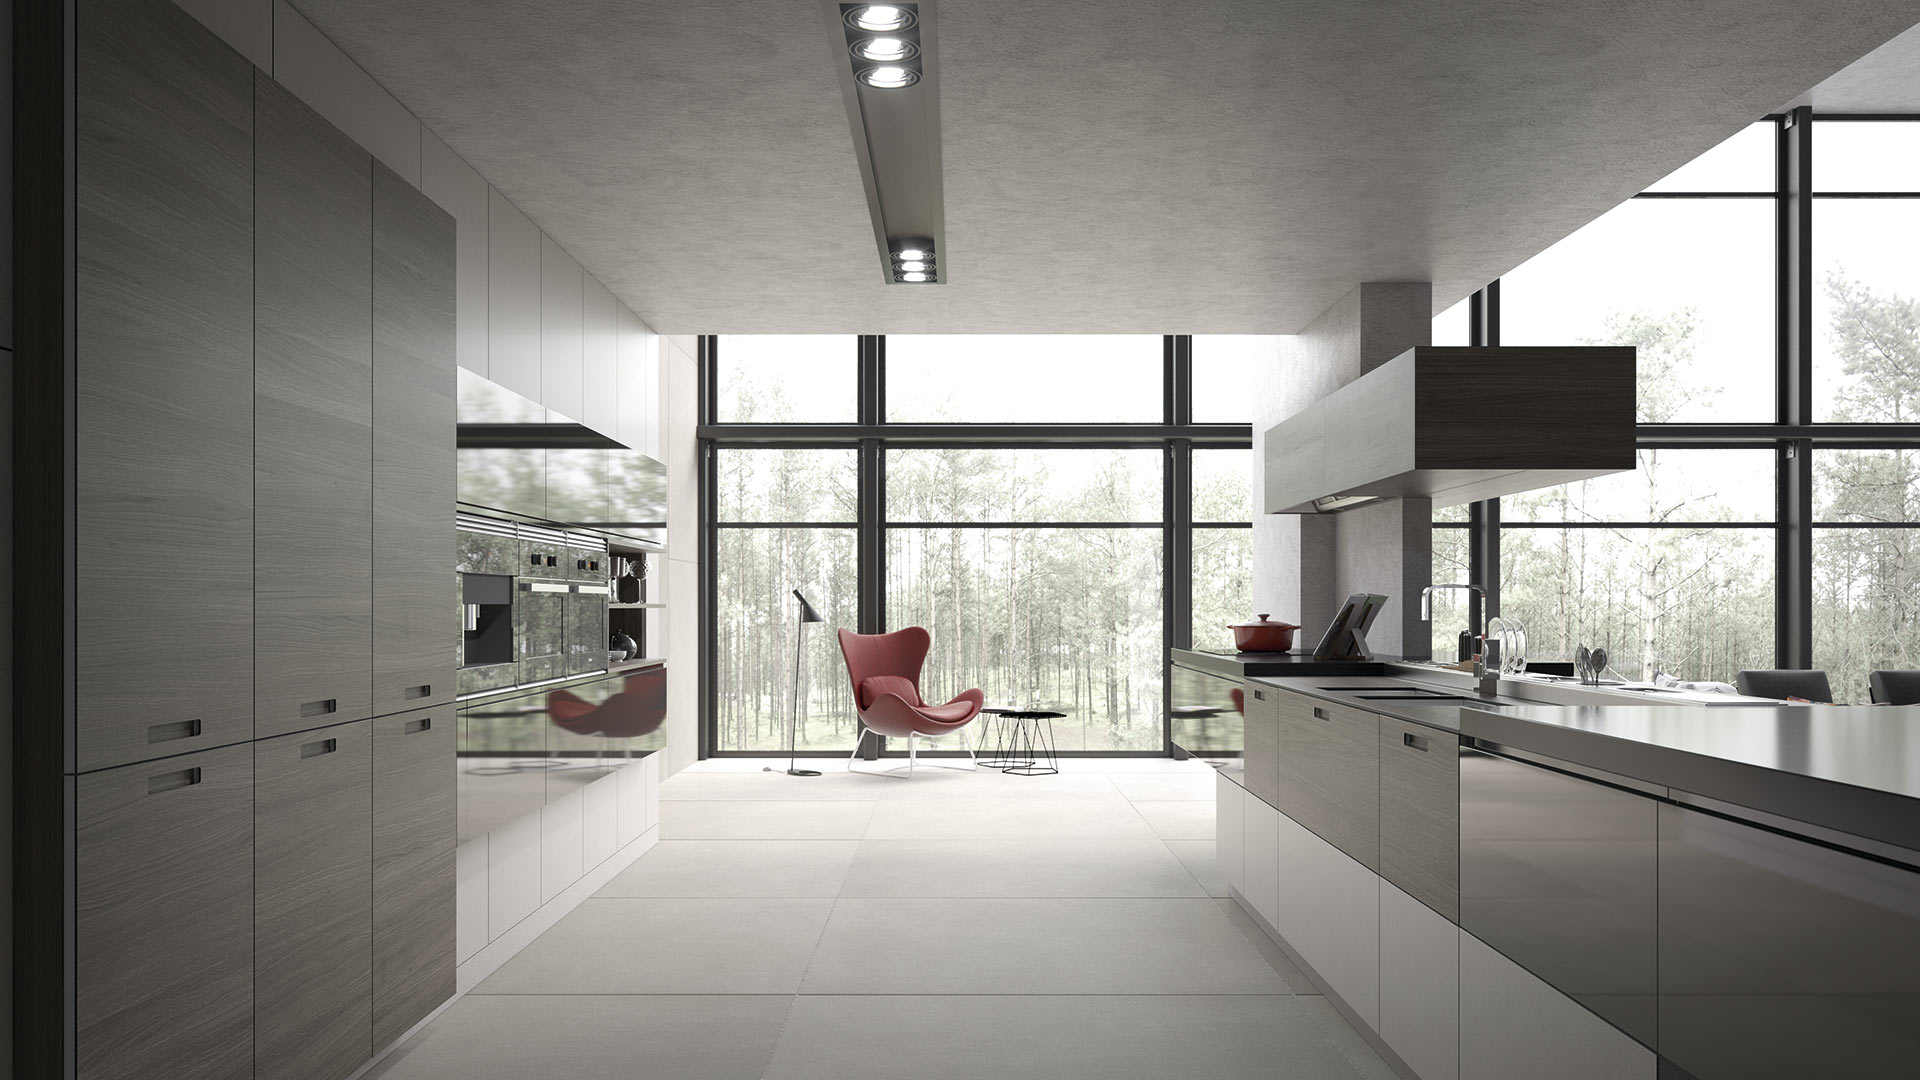 Originality with lines and combination of different materials to create a unique kitchen